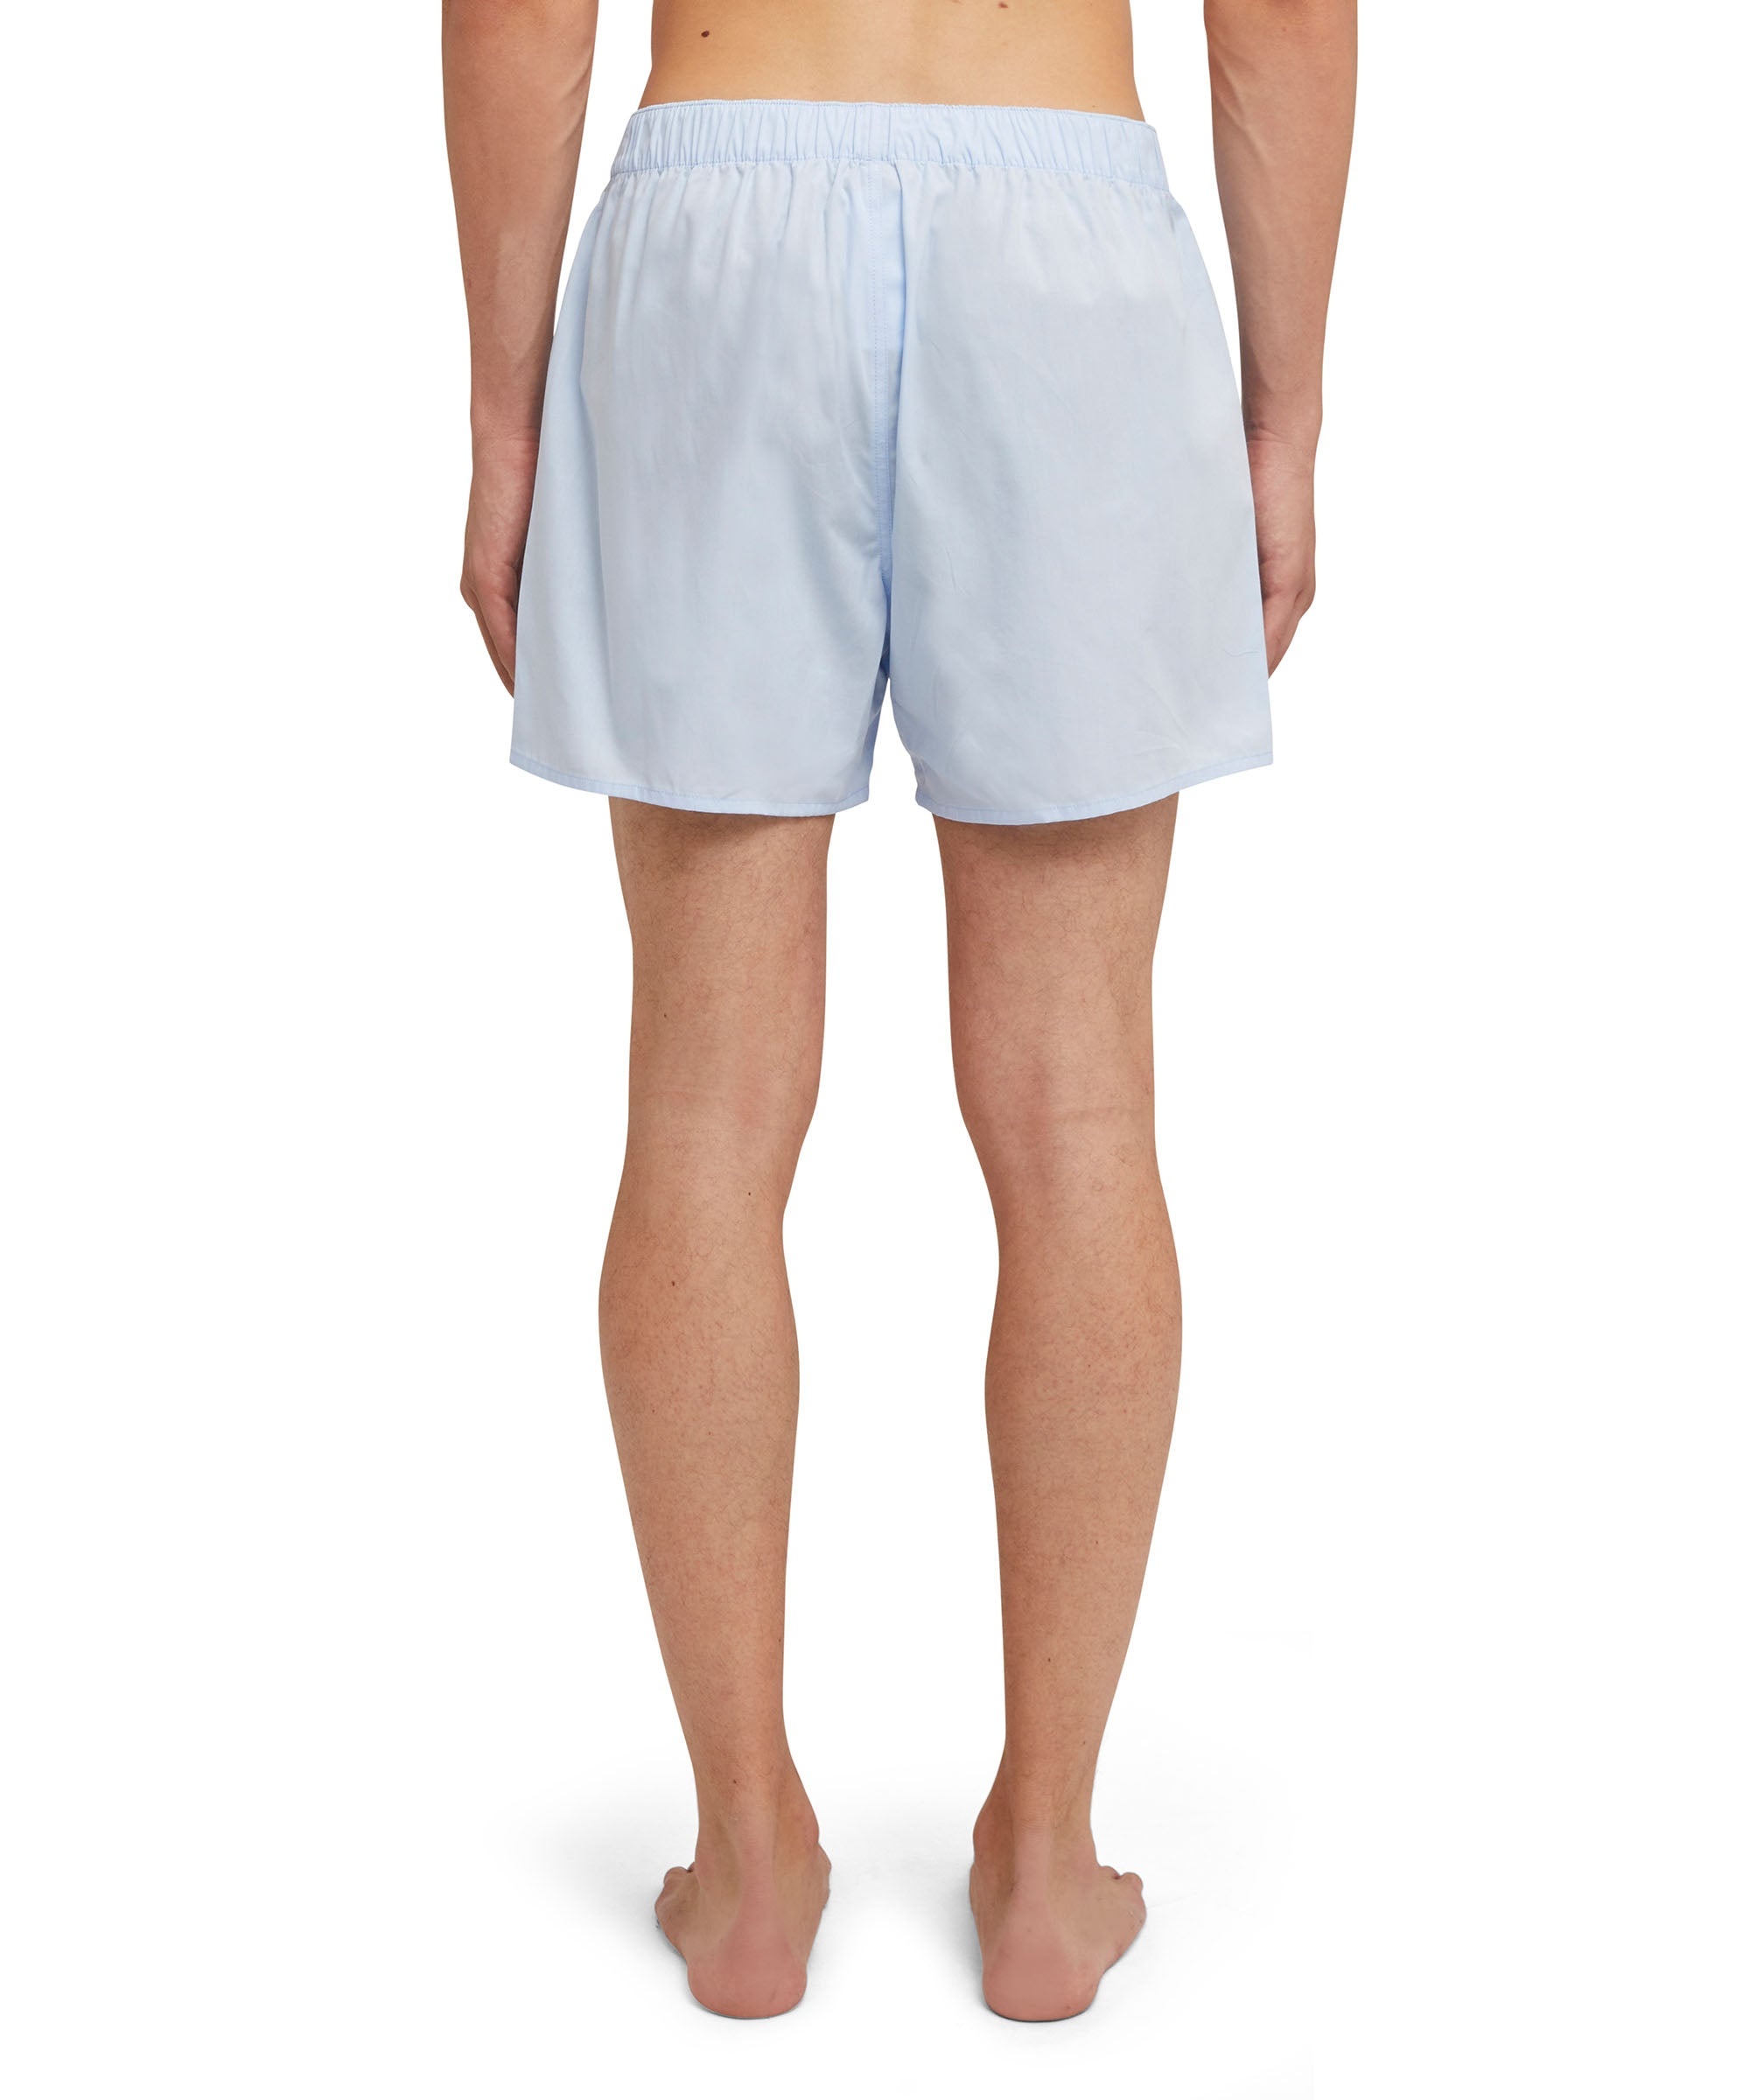 Cotton boxer with a classic line - 3